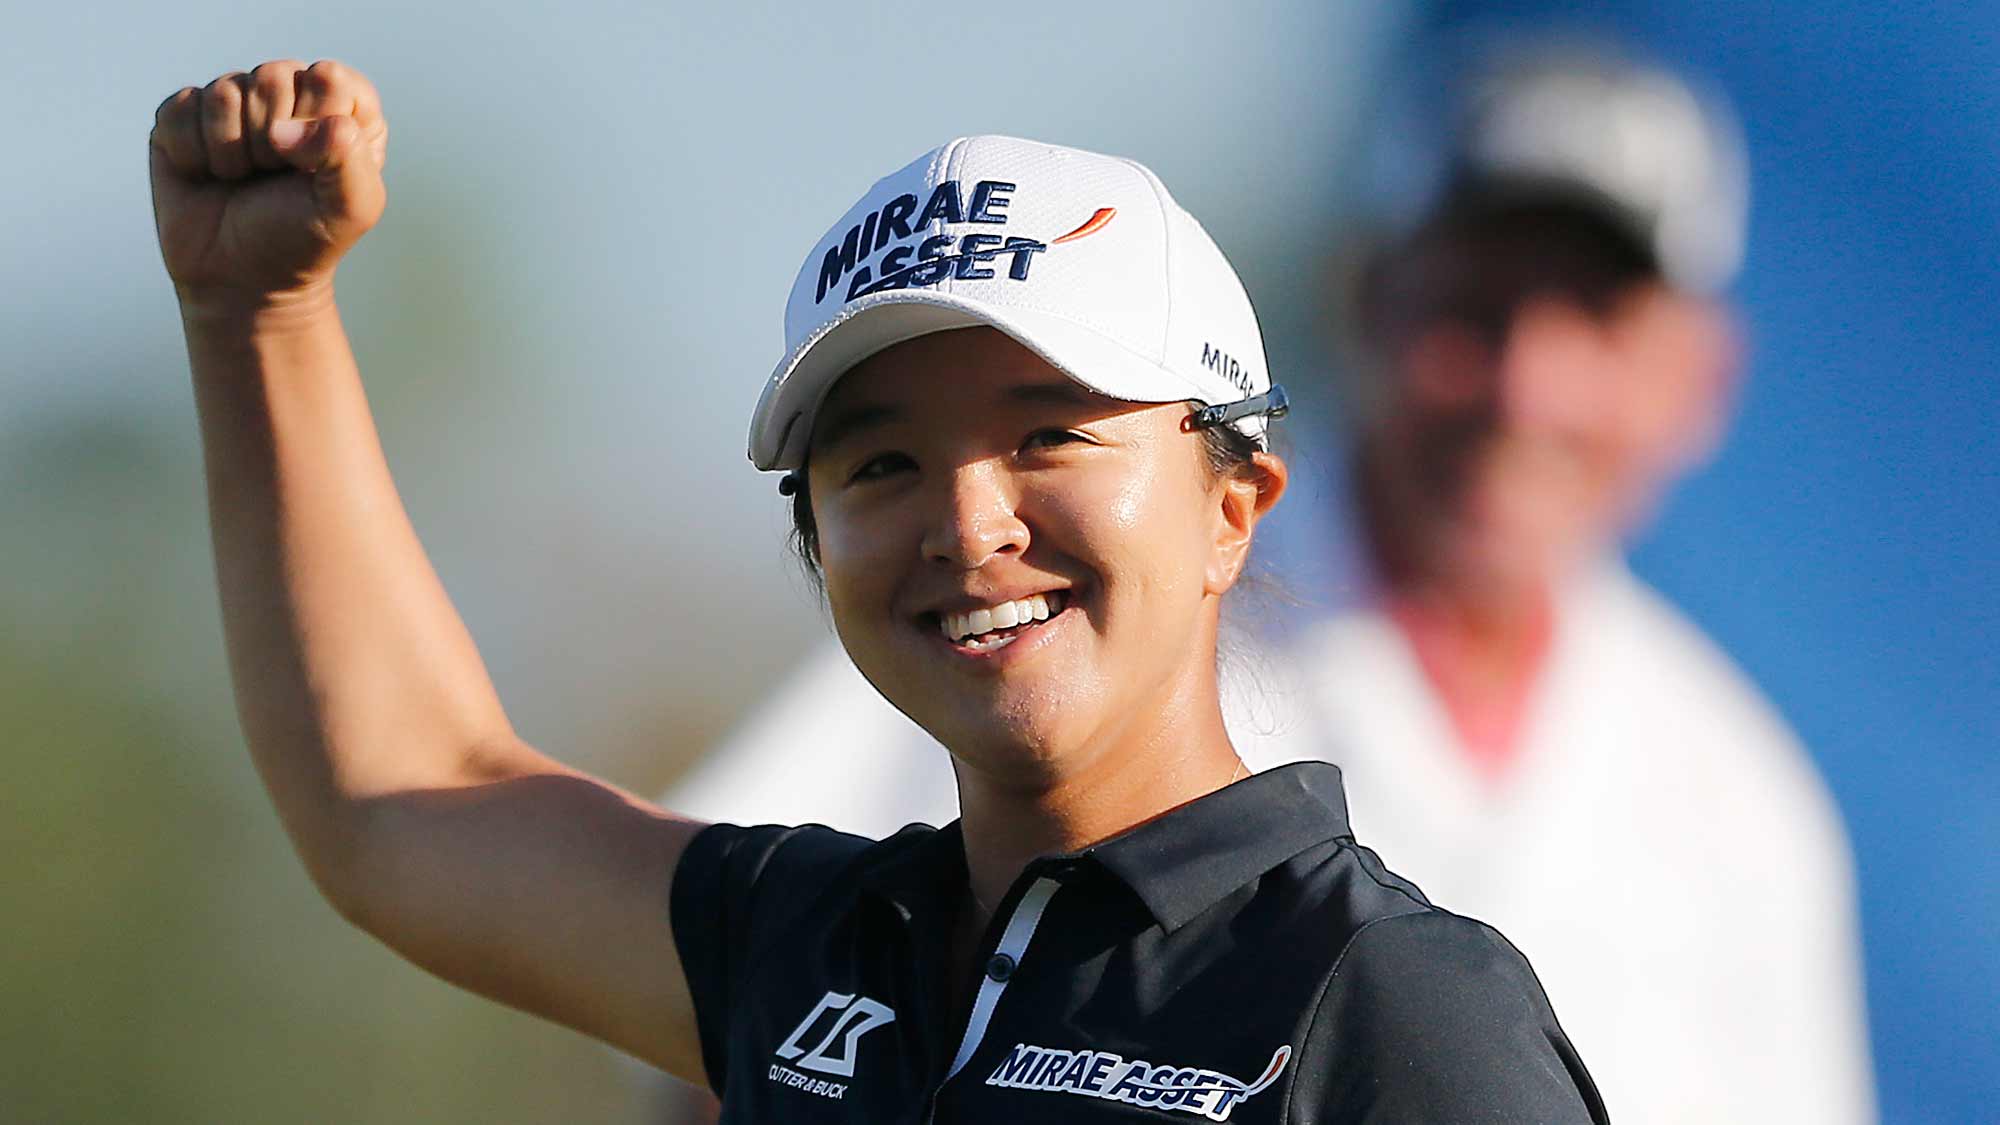 Sei Young Kim of South Korea celebrates after making a putt on the 18th green to win the CME Group Tour Championship at Tiburon Golf Club on November 24, 2019 in Naples, Florida